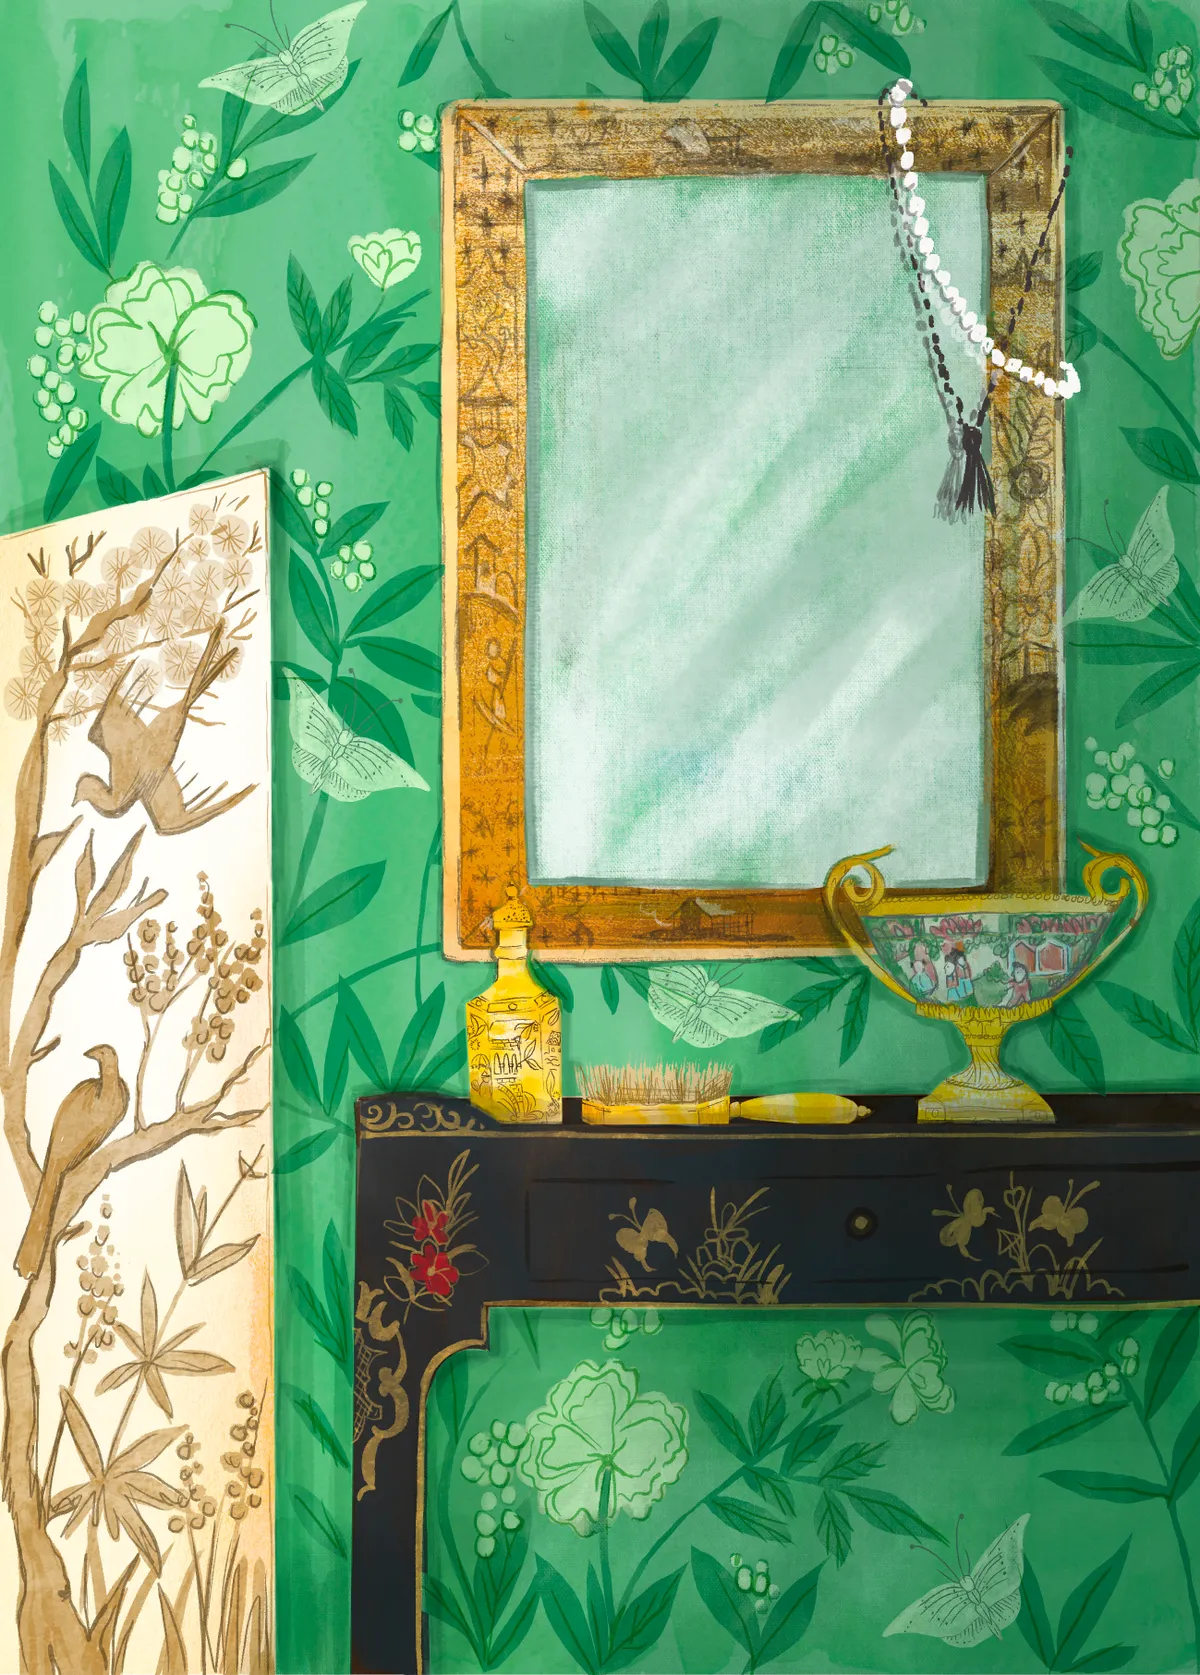 An illustration of Georgian chinoiserie designs by Esther Curtis.